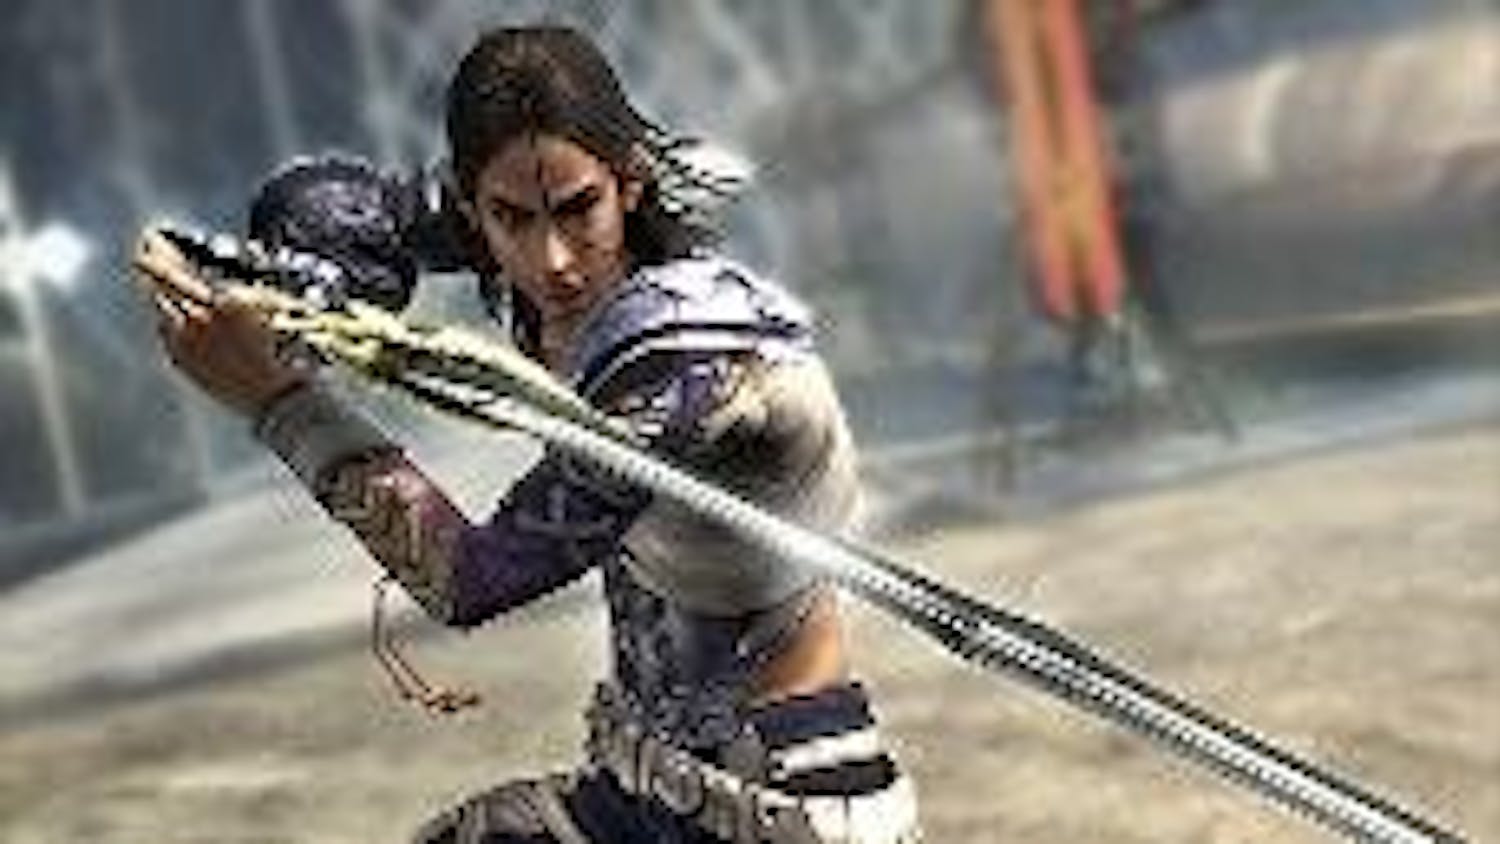 GET 'LOST' - The new Japanese game, "Lost Odyssey," uses vivid graphics to showcase a vibrant and colorful world and environment. Nobuo Uematsu, a renowned video game composer, crafted and orchestrated the clear and intriguing melodies of the game's sound